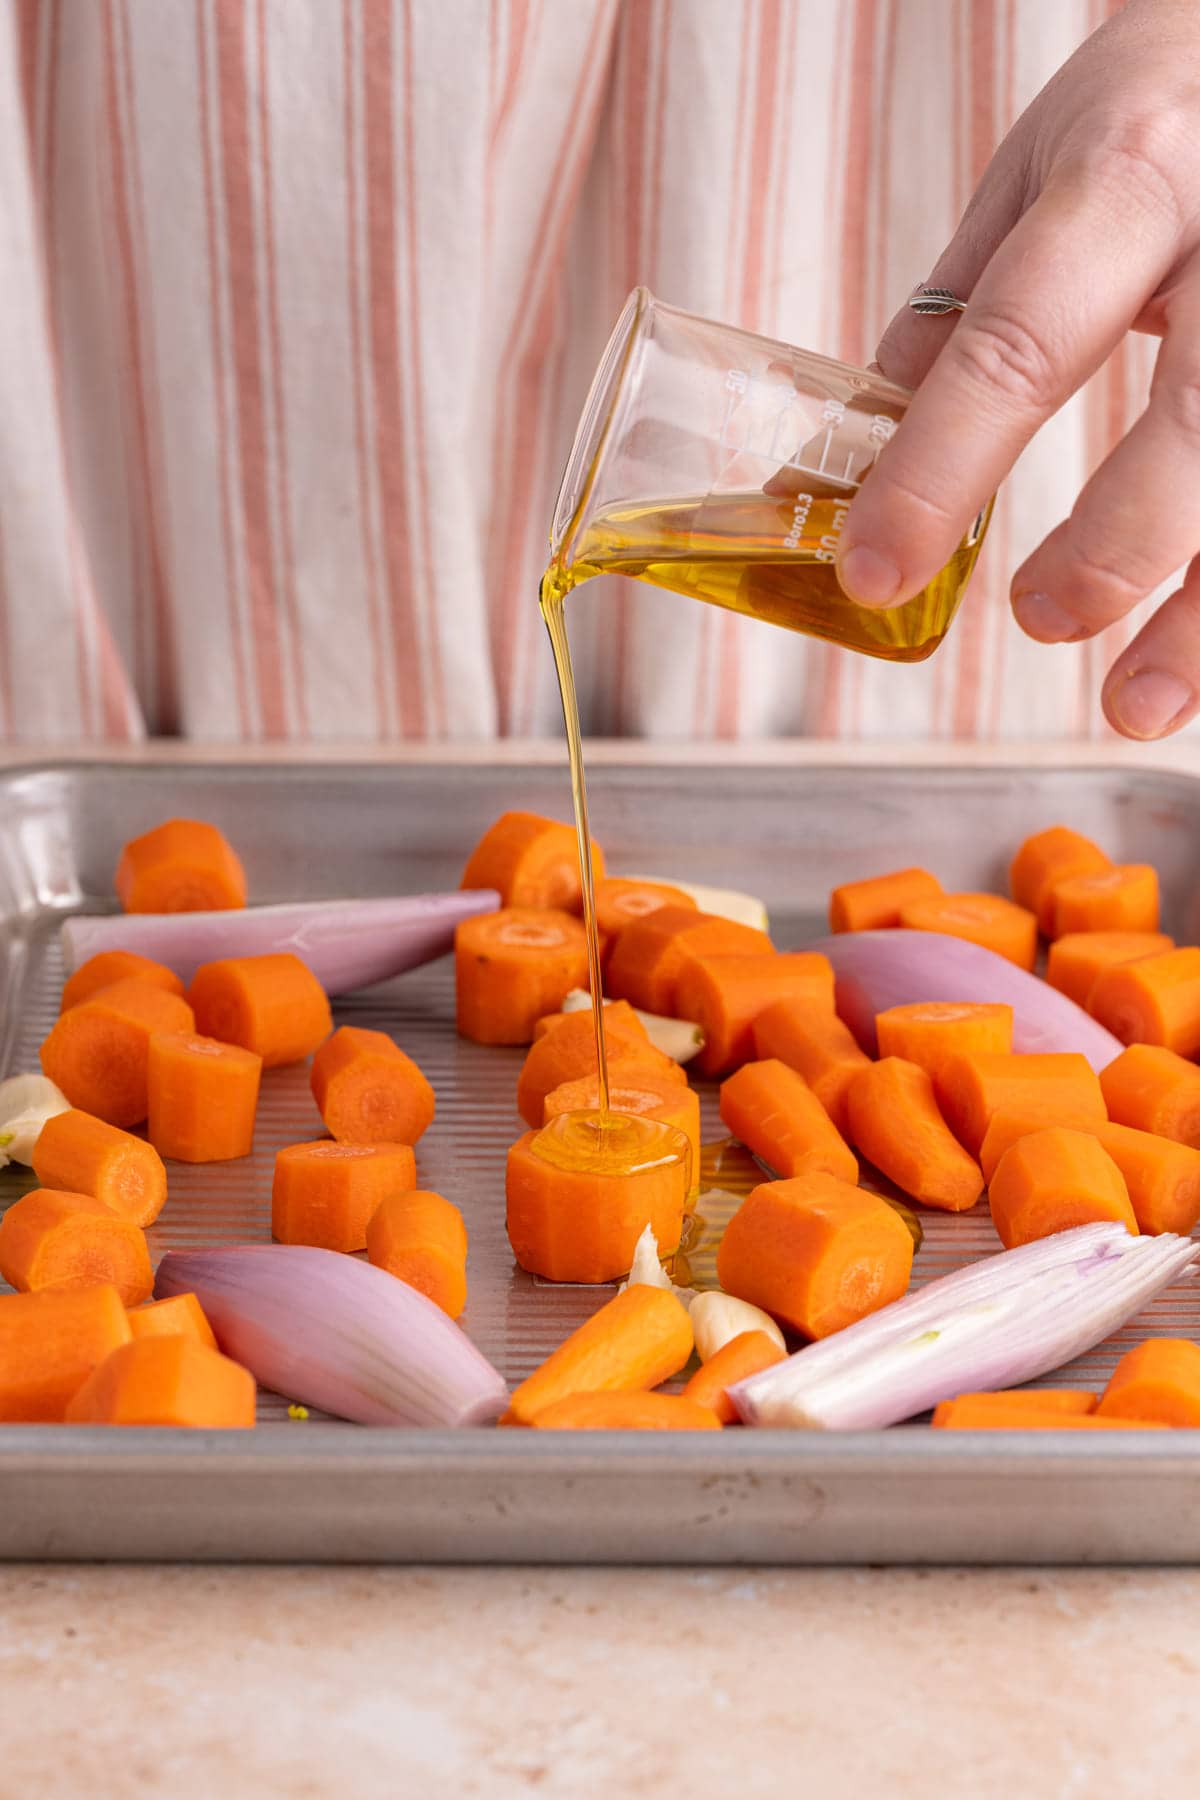 Adding olive oil to carrots to roast them